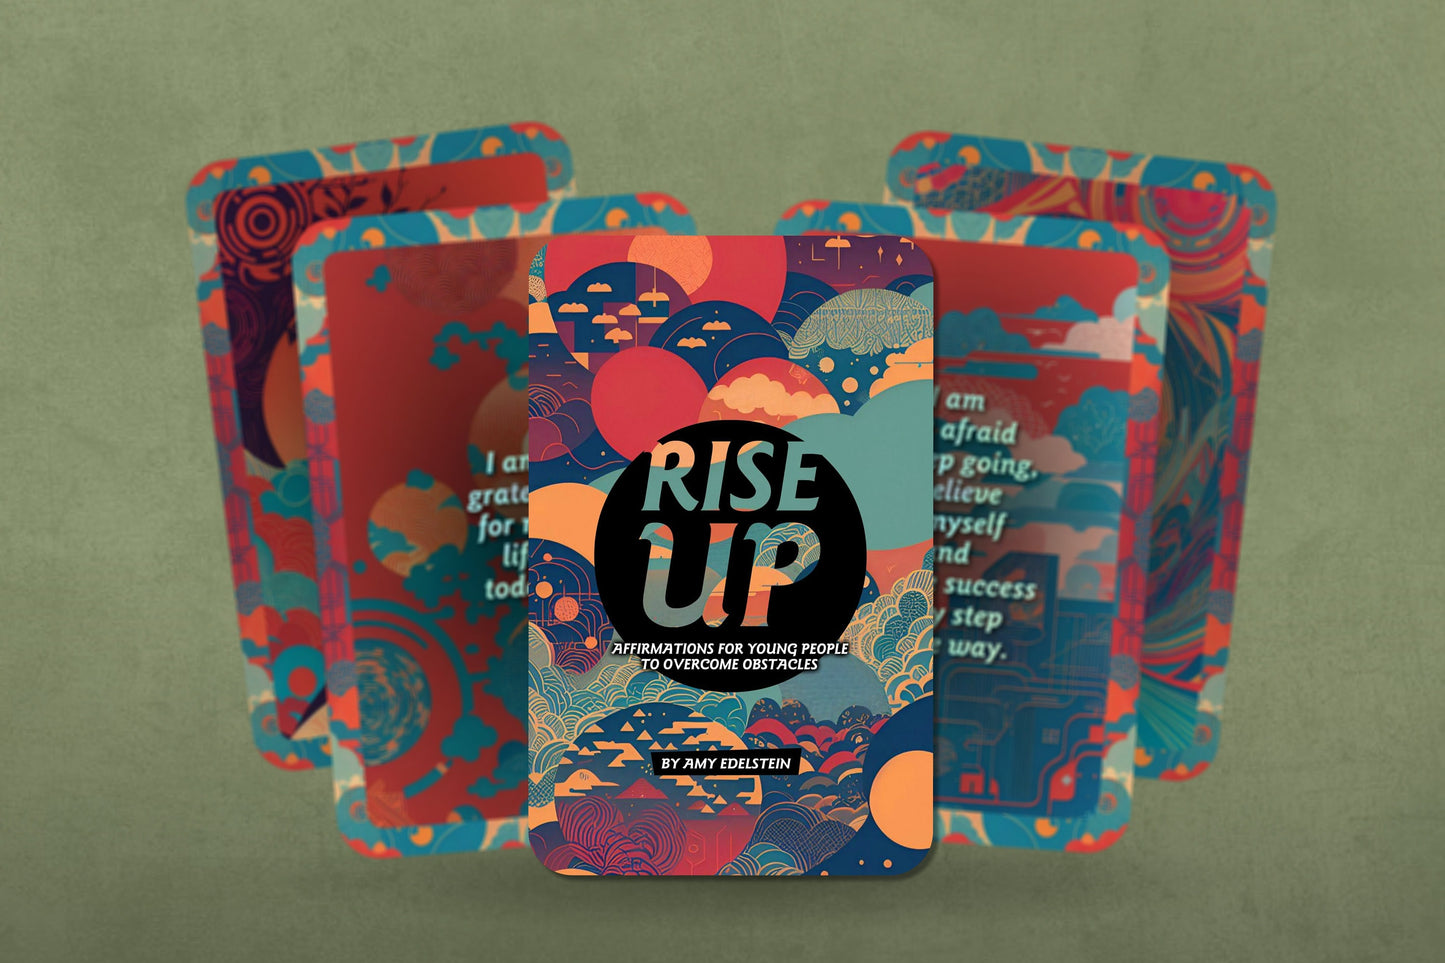 Rise Up - Affirmations to overcome obstacles for young adults - By Amy Edelstein